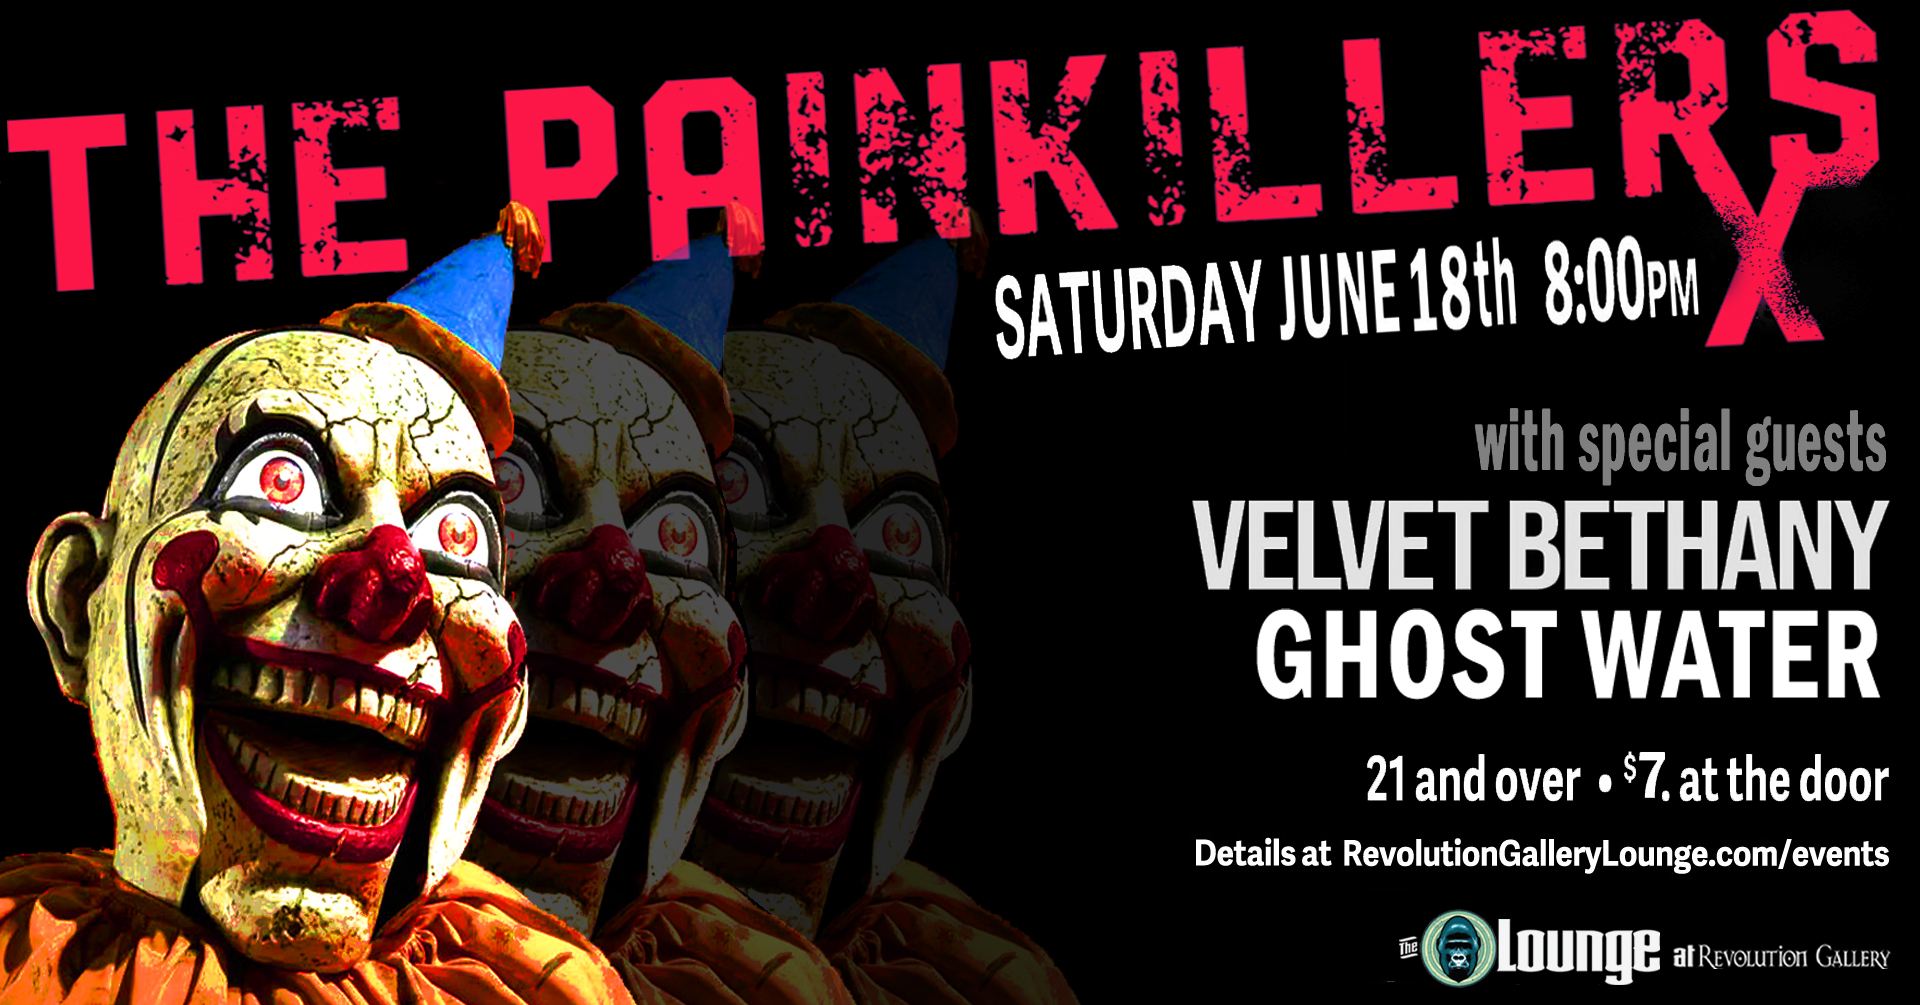 the_painkillers_FB_BANNER_JUNE18th_final